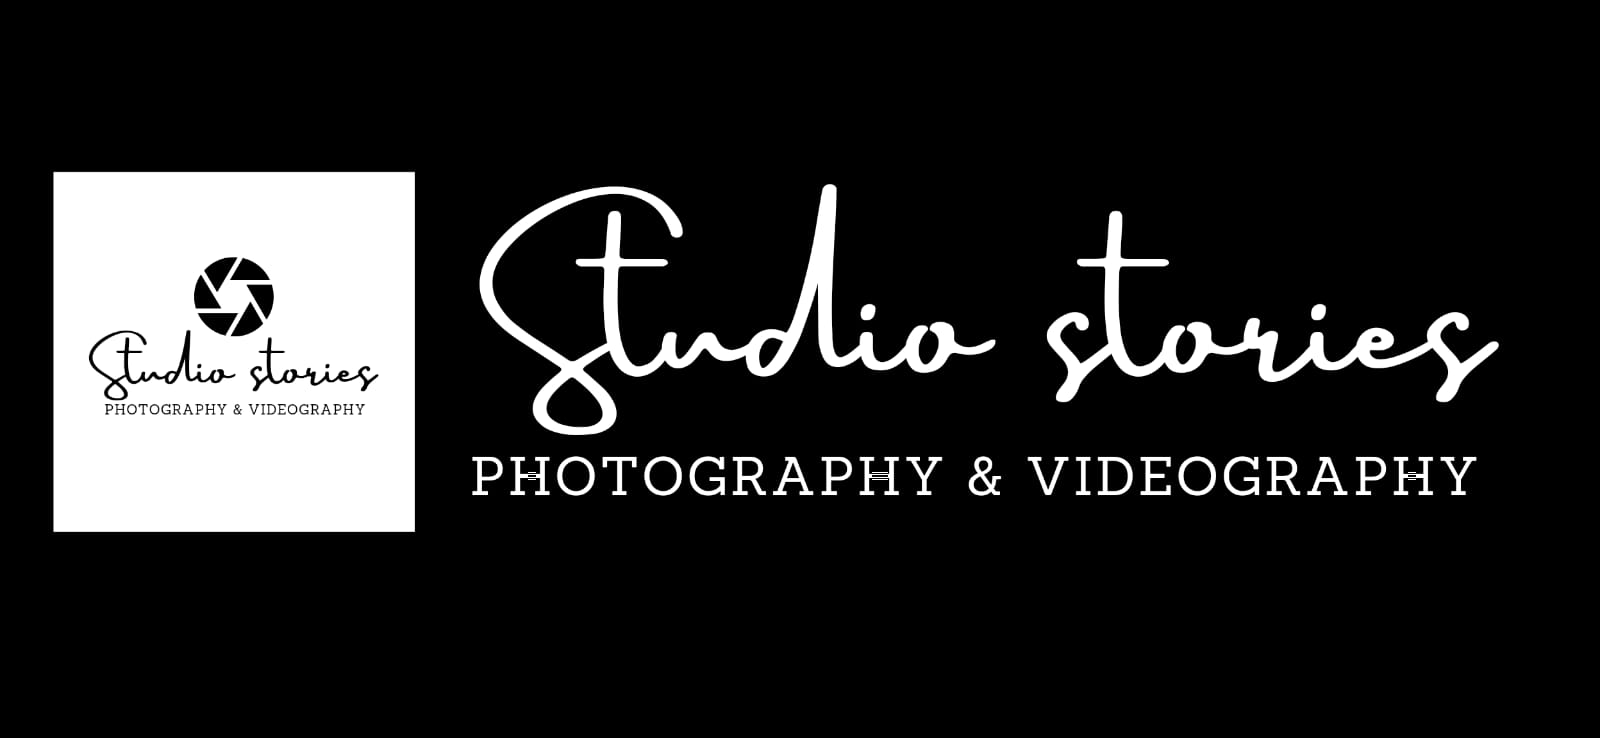 Studio Stories - Photography & Videography